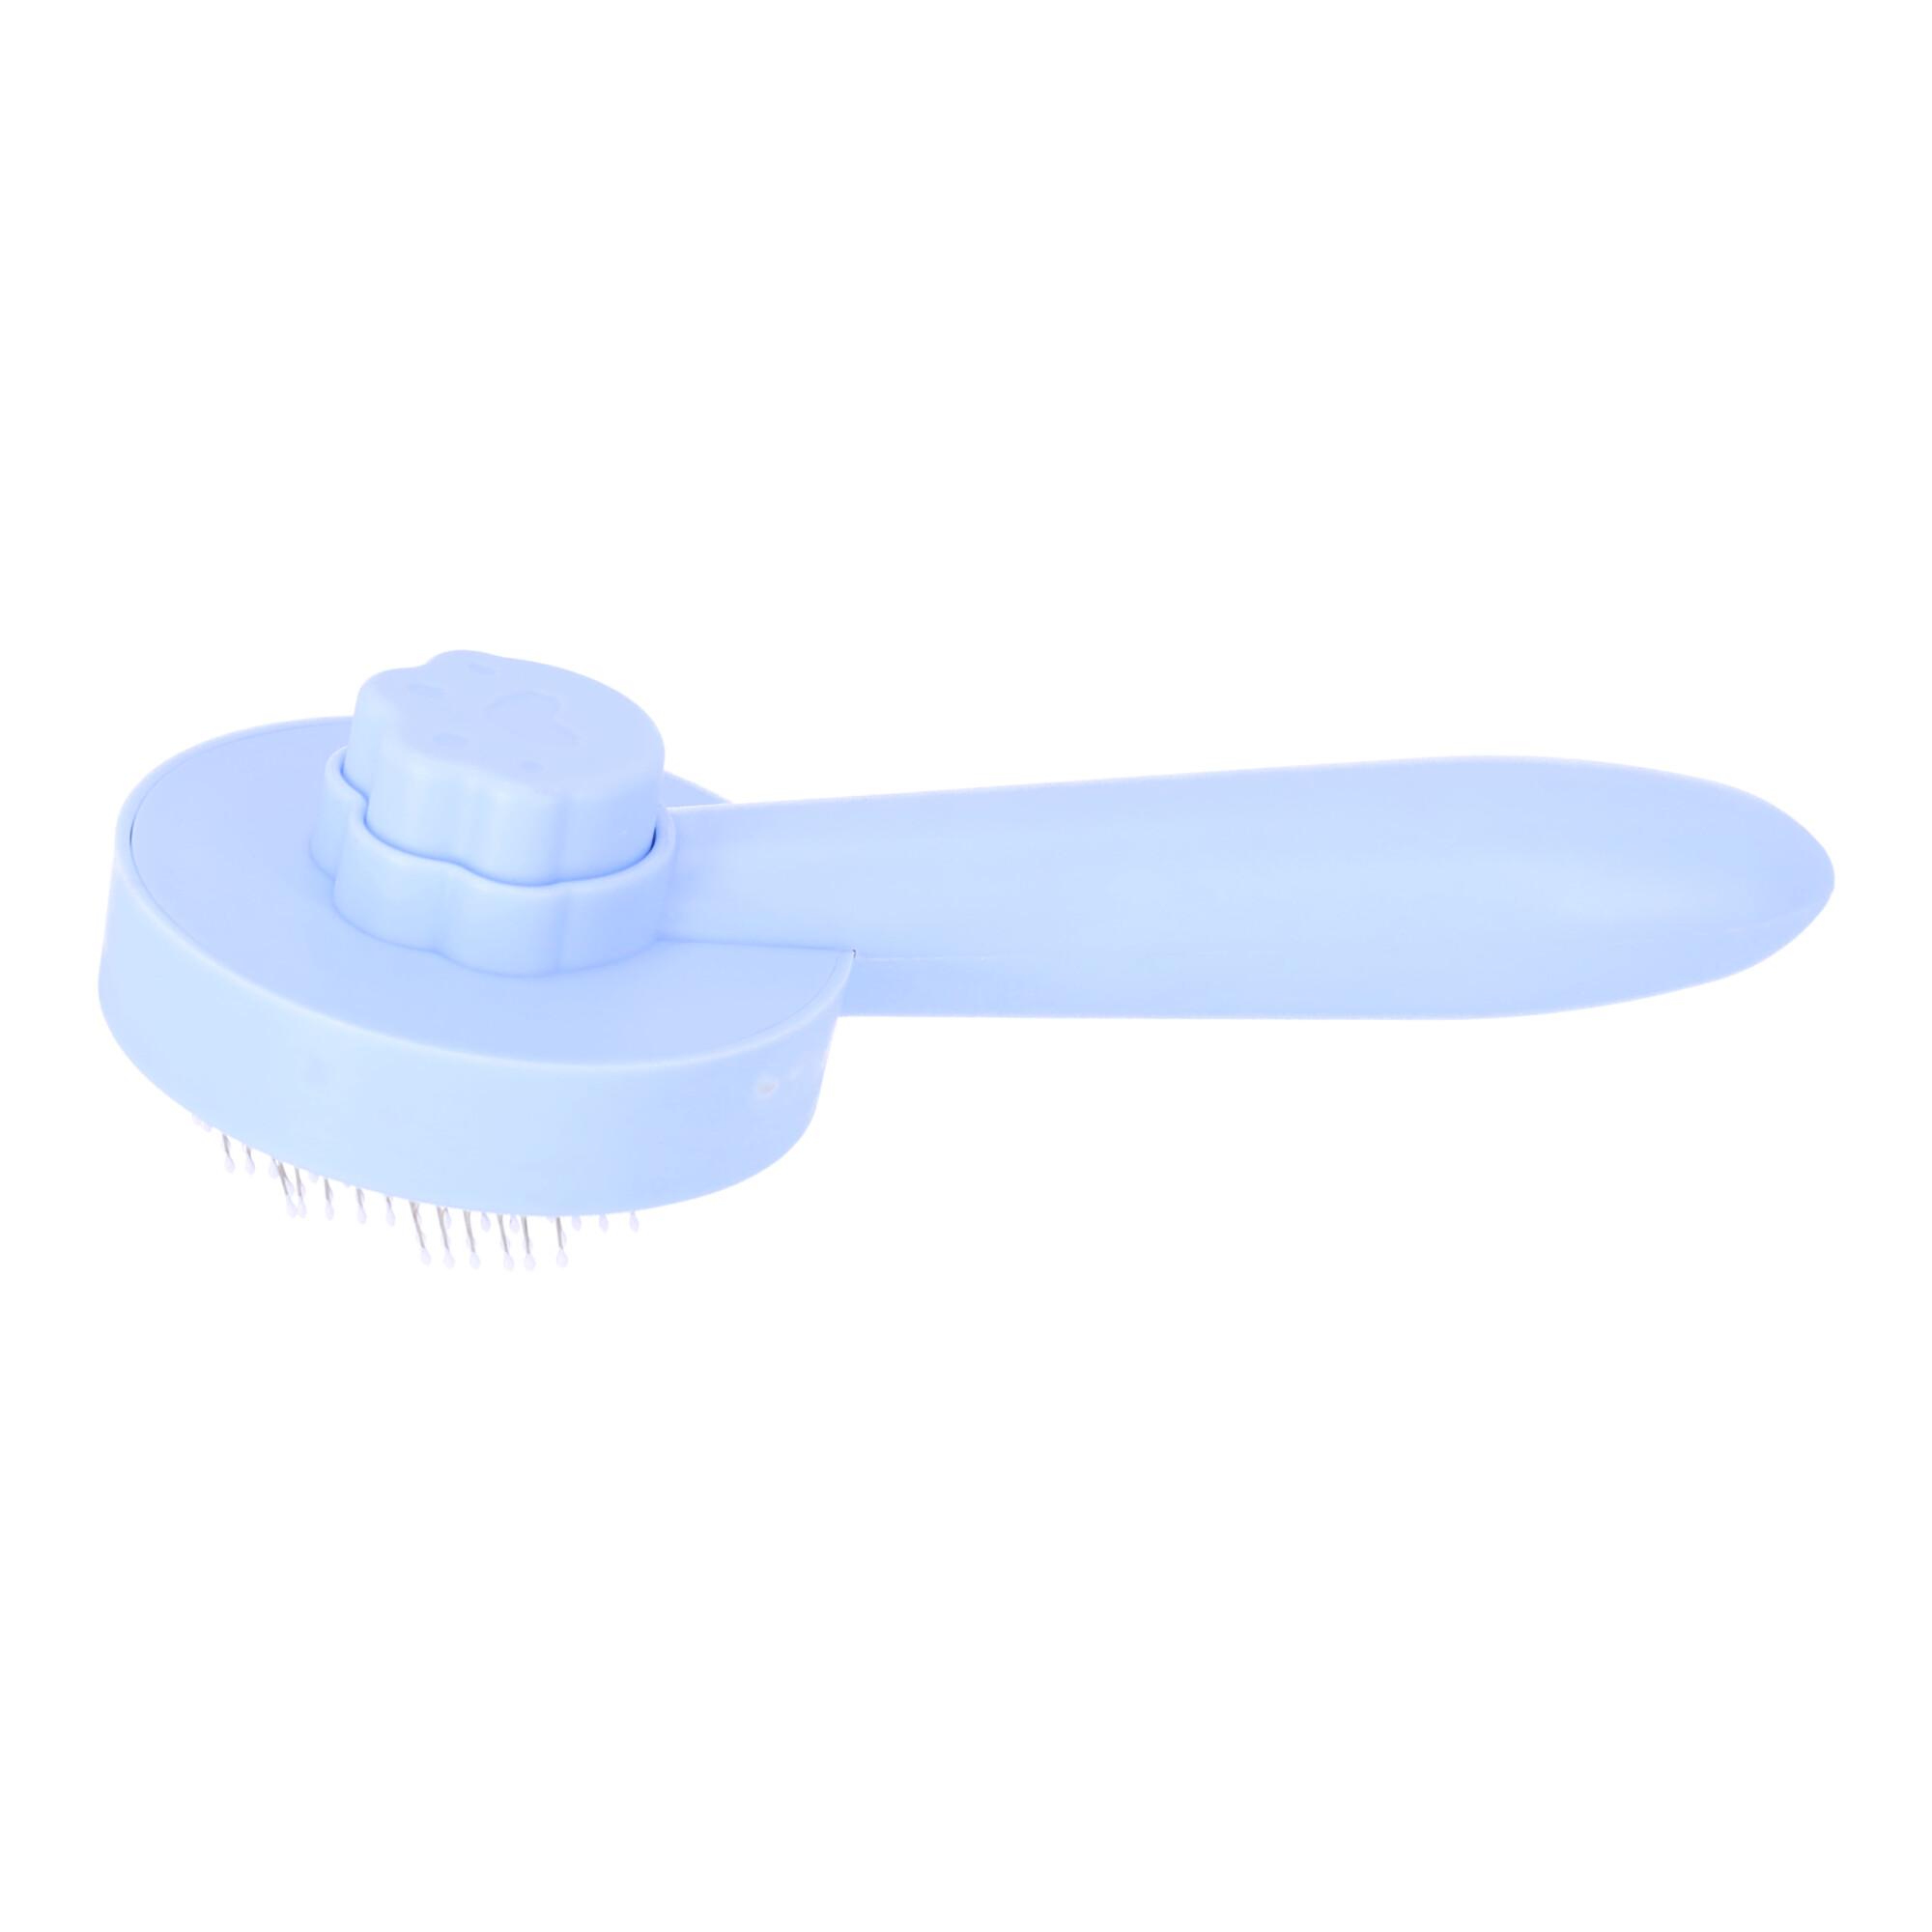 Brush for hair removal dog or cat - blue